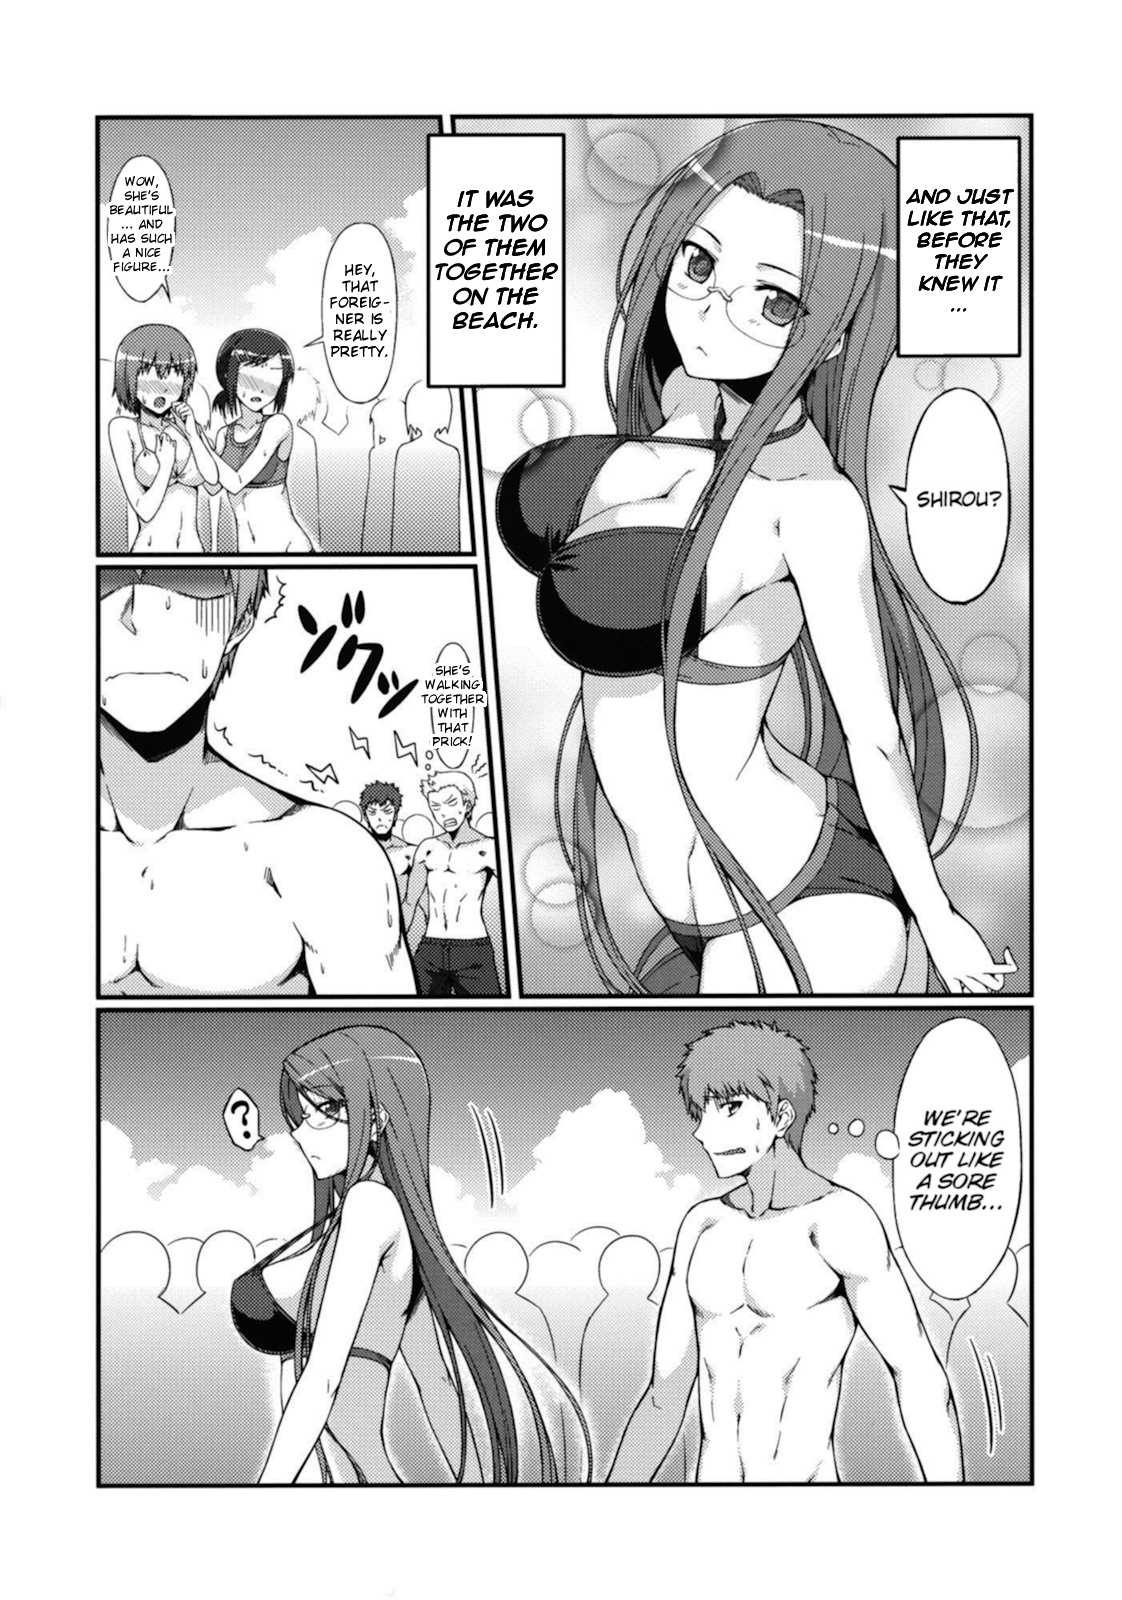 (C81)[S.S.L (Yanagi)] Rider-san and the Beach (Fate Stay/Night) [Eng] [doujin-moe.us, CGRascal]} (コミックマーケット 81) [S.S.L (柳)] ライダーさんと海水浴 (フェイトステイナイト) [英訳]